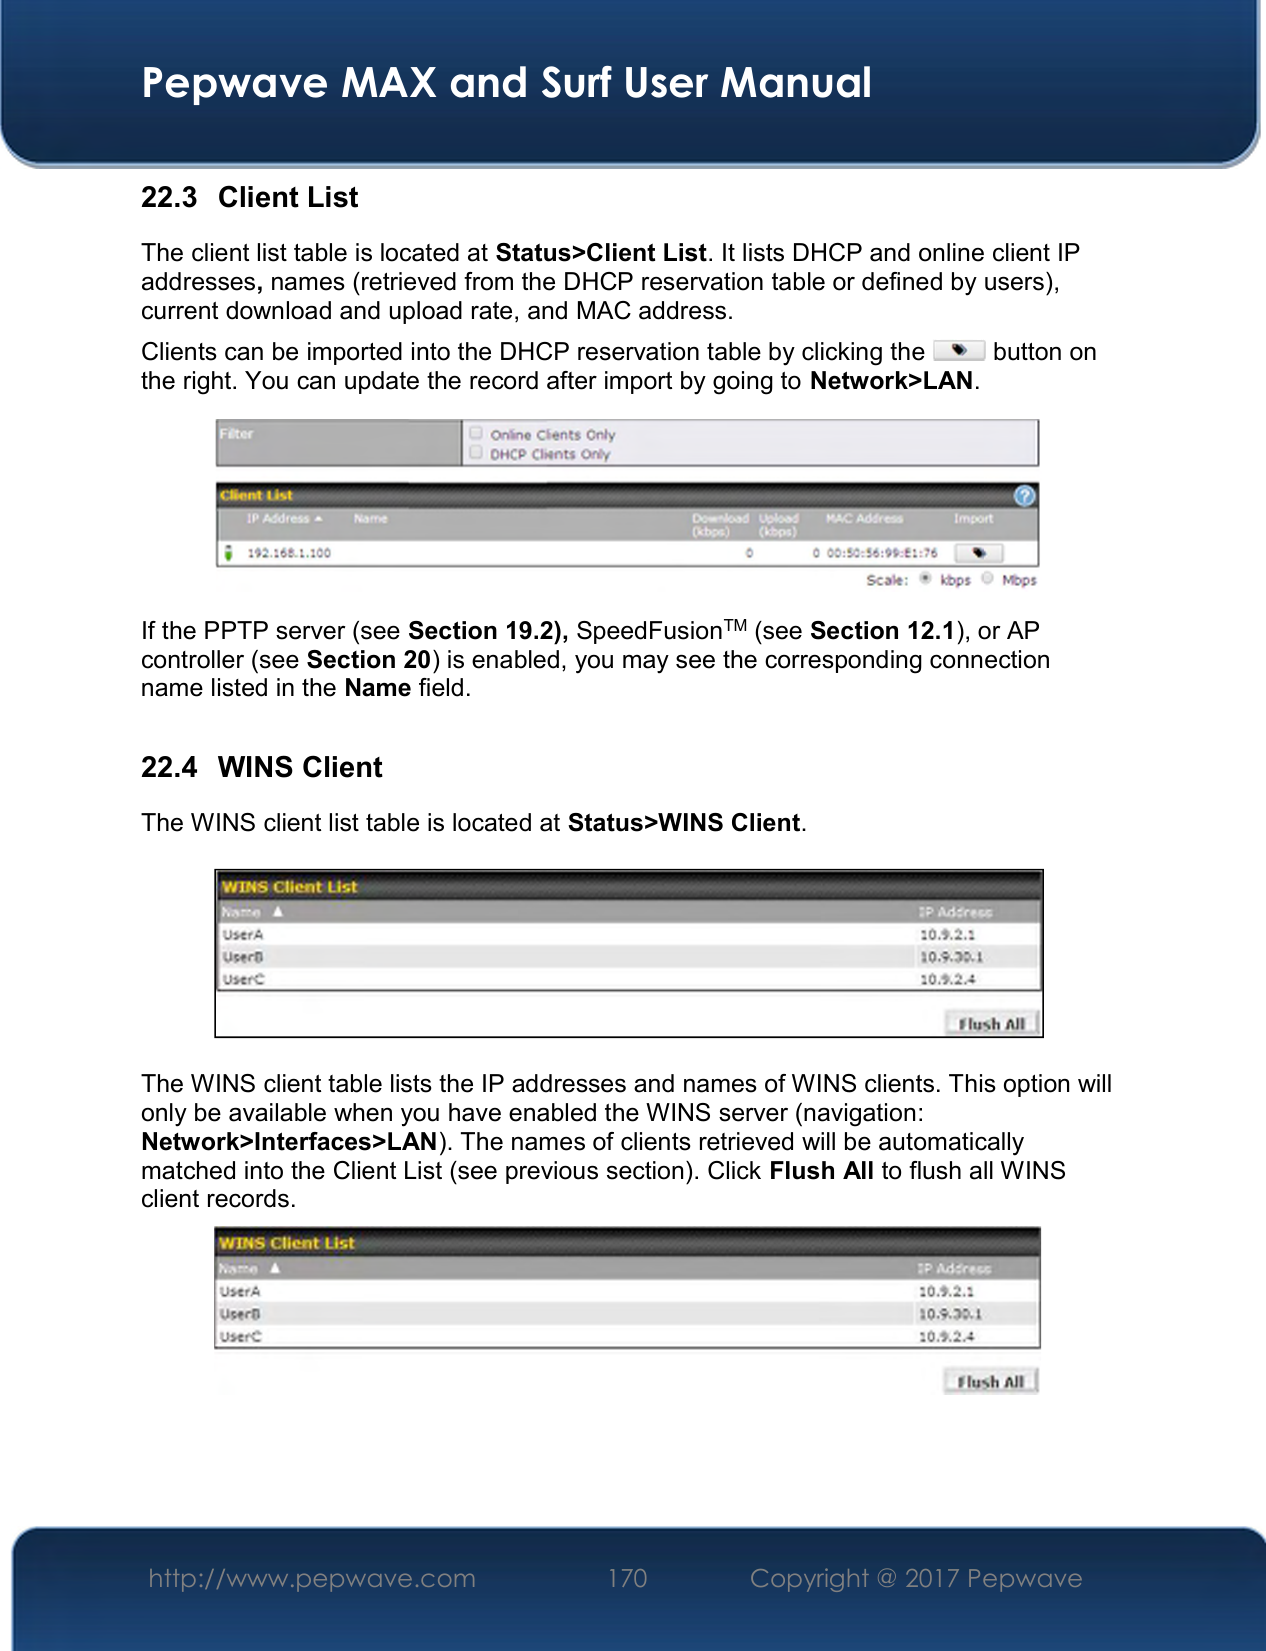  Pepwave MAX and Surf User Manual http://www.pepwave.com  170    Copyright @ 2017 Pepwave   22.3  Client List The client list table is located at Status&gt;Client List. It lists DHCP and online client IP addresses, names (retrieved from the DHCP reservation table or defined by users), current download and upload rate, and MAC address.  Clients can be imported into the DHCP reservation table by clicking the   button on the right. You can update the record after import by going to Network&gt;LAN.  If the PPTP server (see Section 19.2), SpeedFusionTM (see Section 12.1), or AP controller (see Section 20) is enabled, you may see the corresponding connection name listed in the Name field.  22.4  WINS Client The WINS client list table is located at Status&gt;WINS Client.      The WINS client table lists the IP addresses and names of WINS clients. This option will only be available when you have enabled the WINS server (navigation: Network&gt;Interfaces&gt;LAN). The names of clients retrieved will be automatically matched into the Client List (see previous section). Click Flush All to flush all WINS client records.     